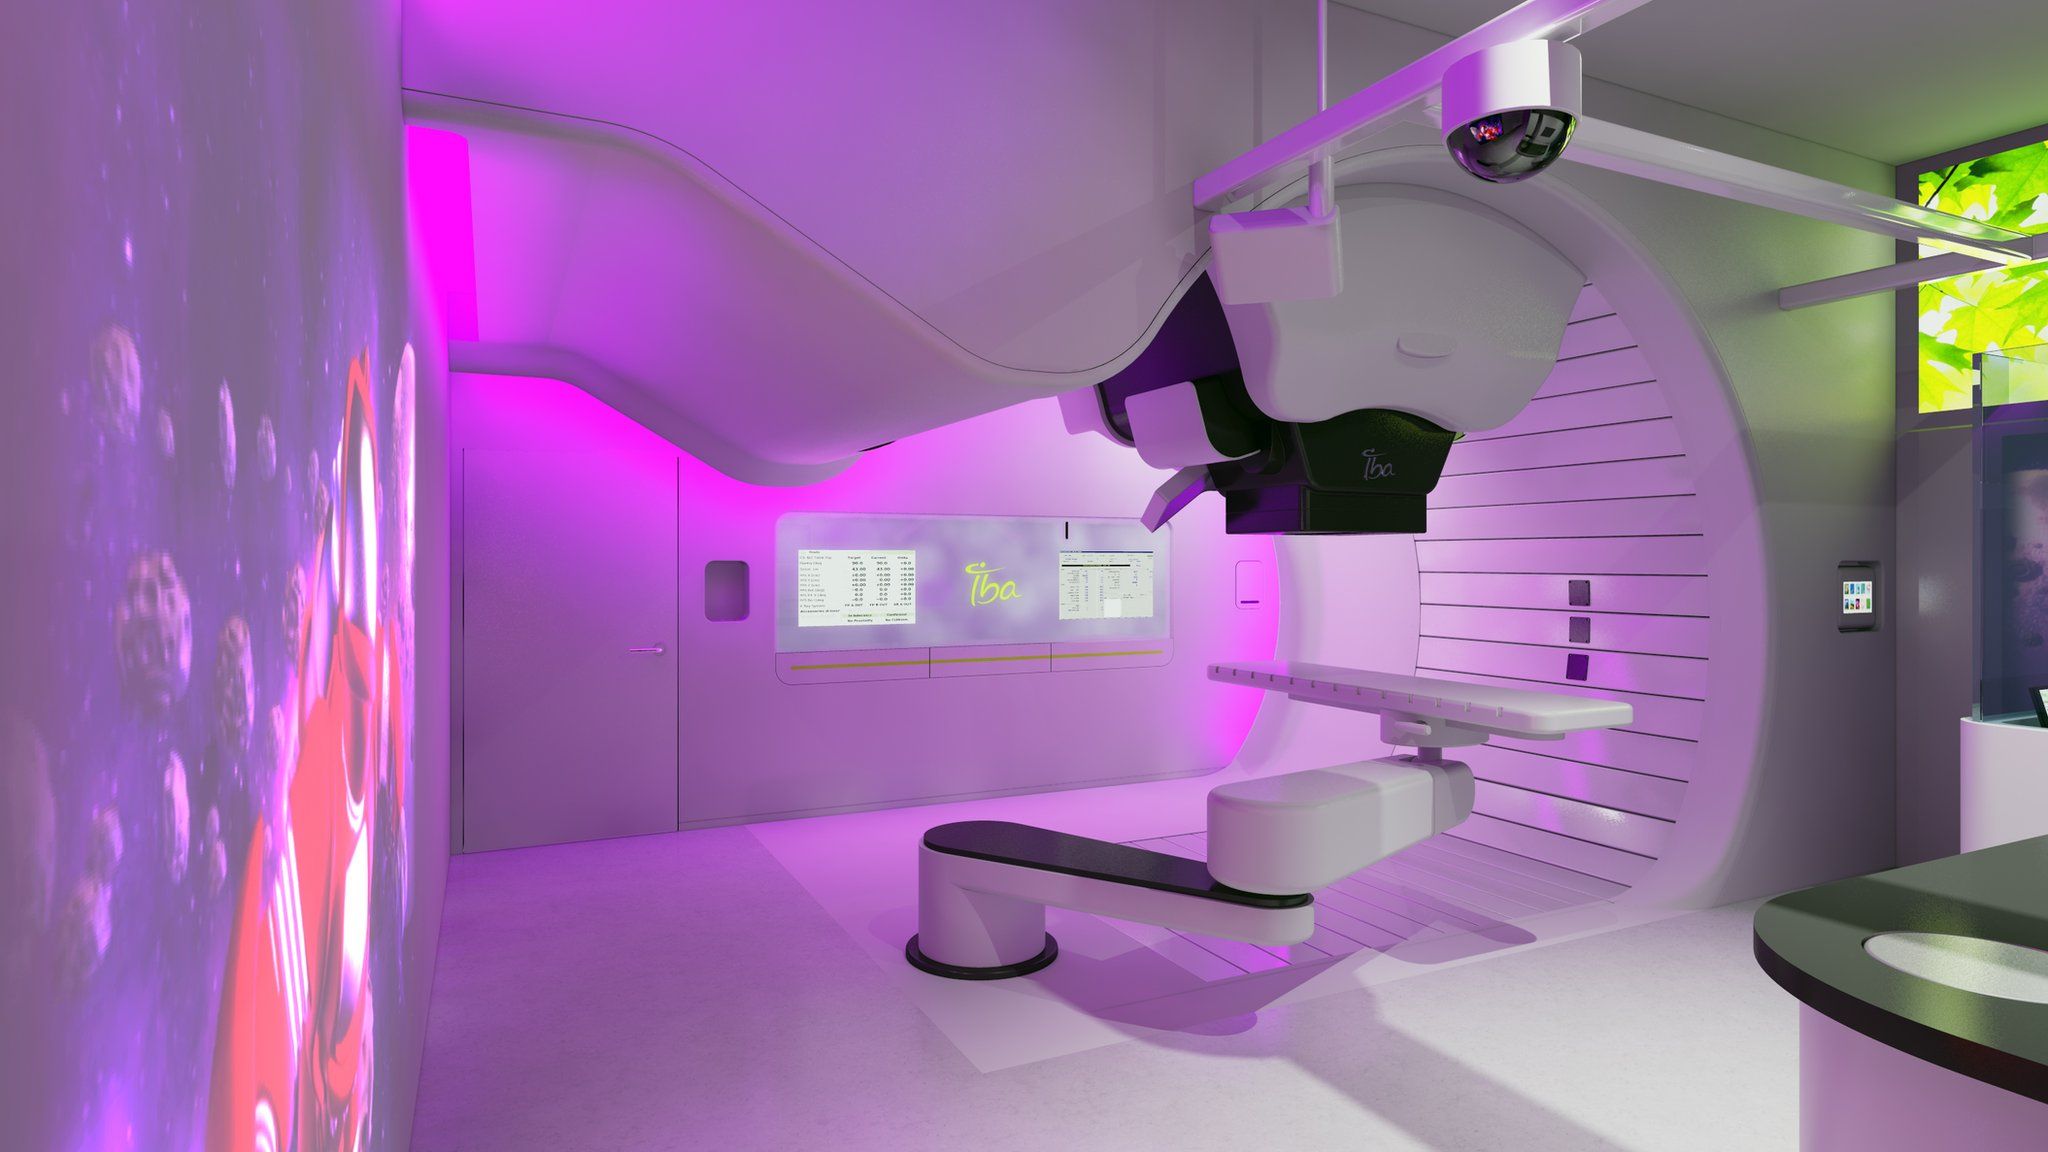 How the proton beam therapy room will look